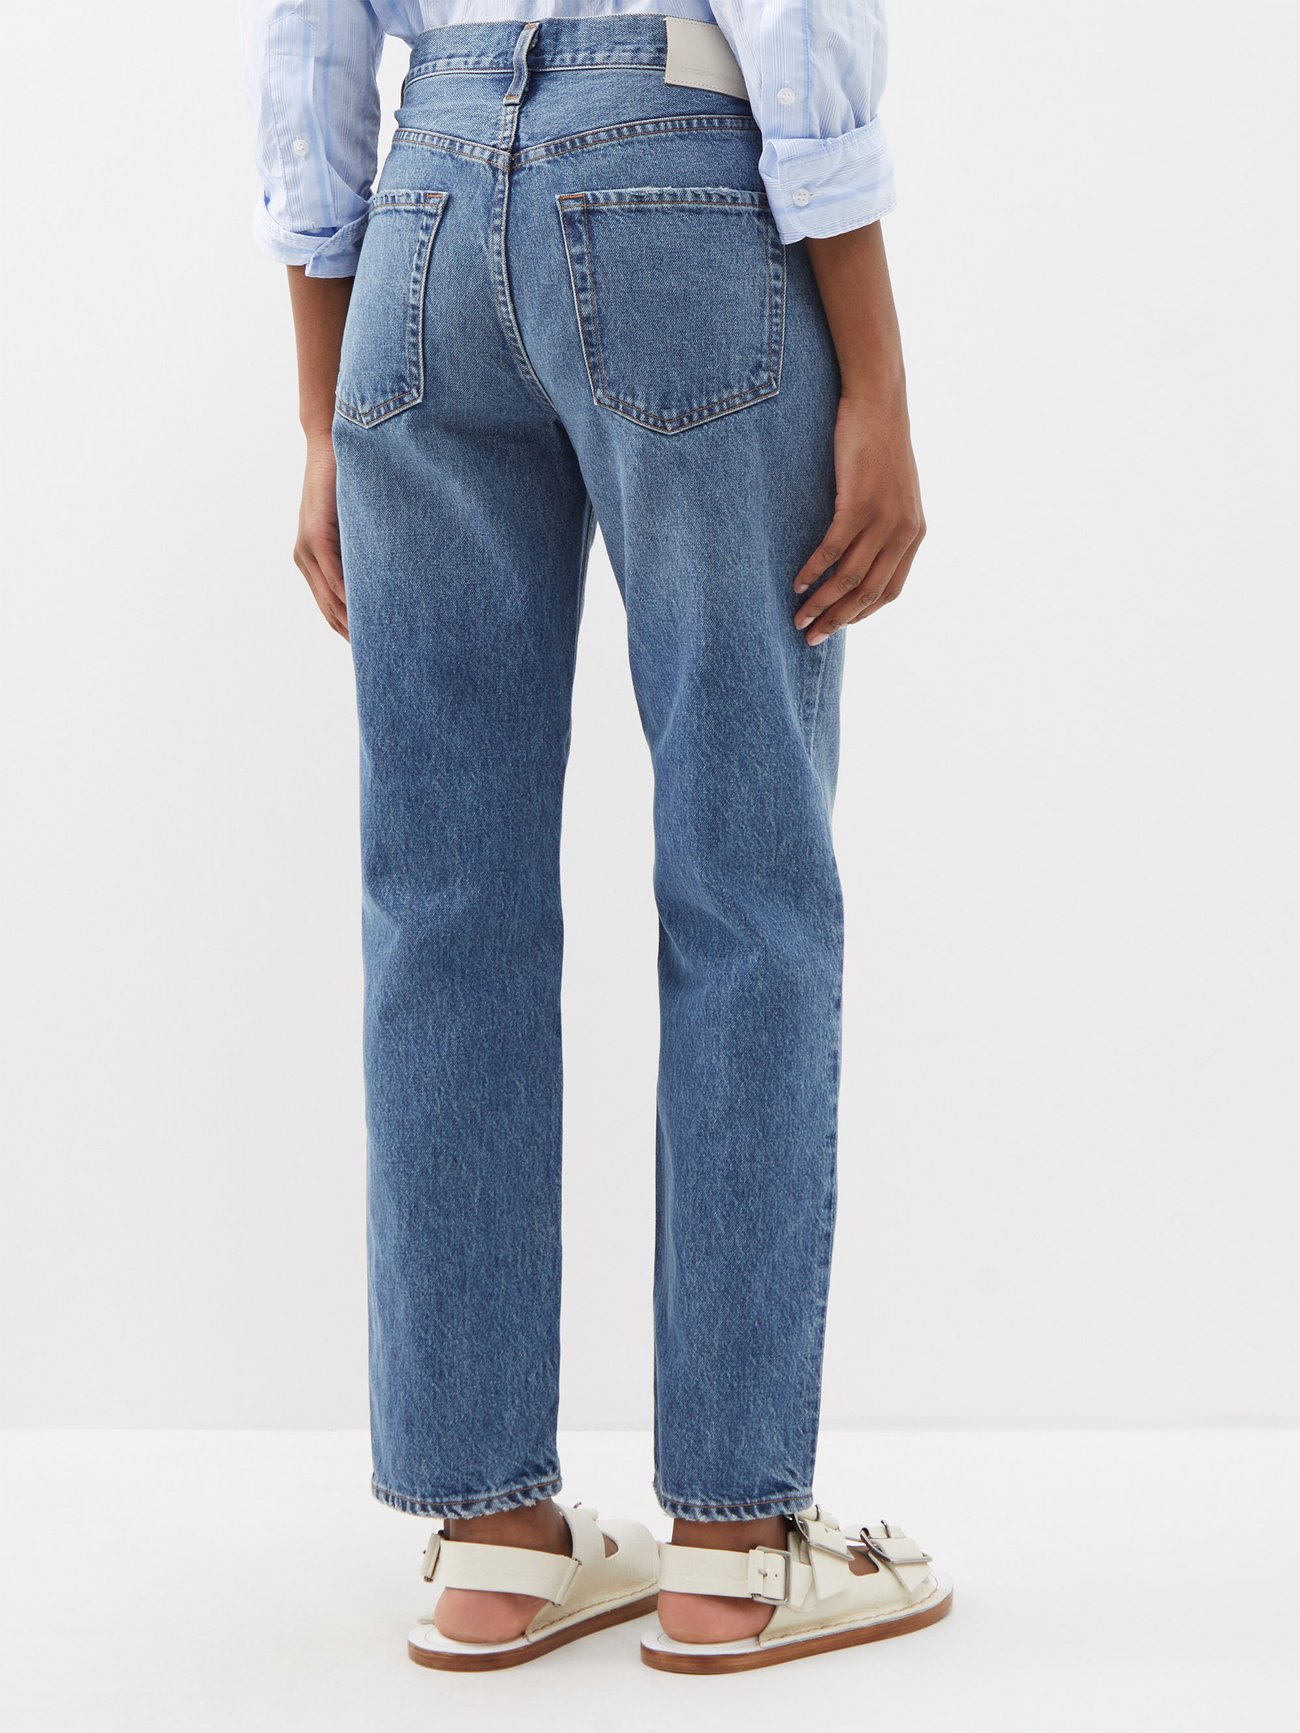 Blue Devi low-rise tapered-leg jeans, Citizens of Humanity